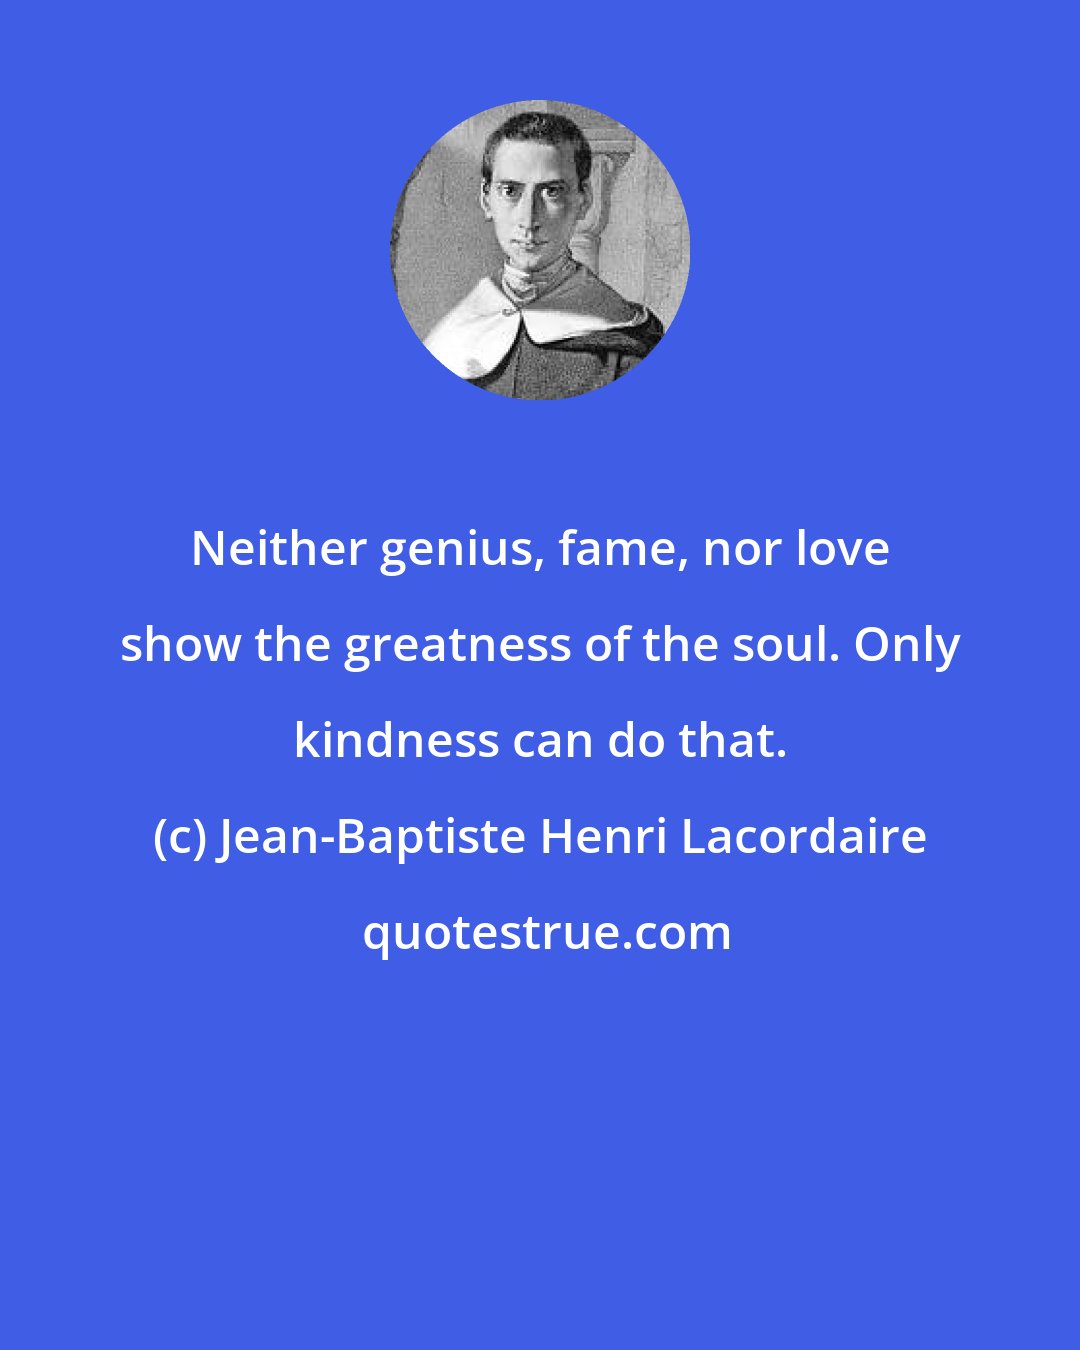 Jean-Baptiste Henri Lacordaire: Neither genius, fame, nor love show the greatness of the soul. Only kindness can do that.